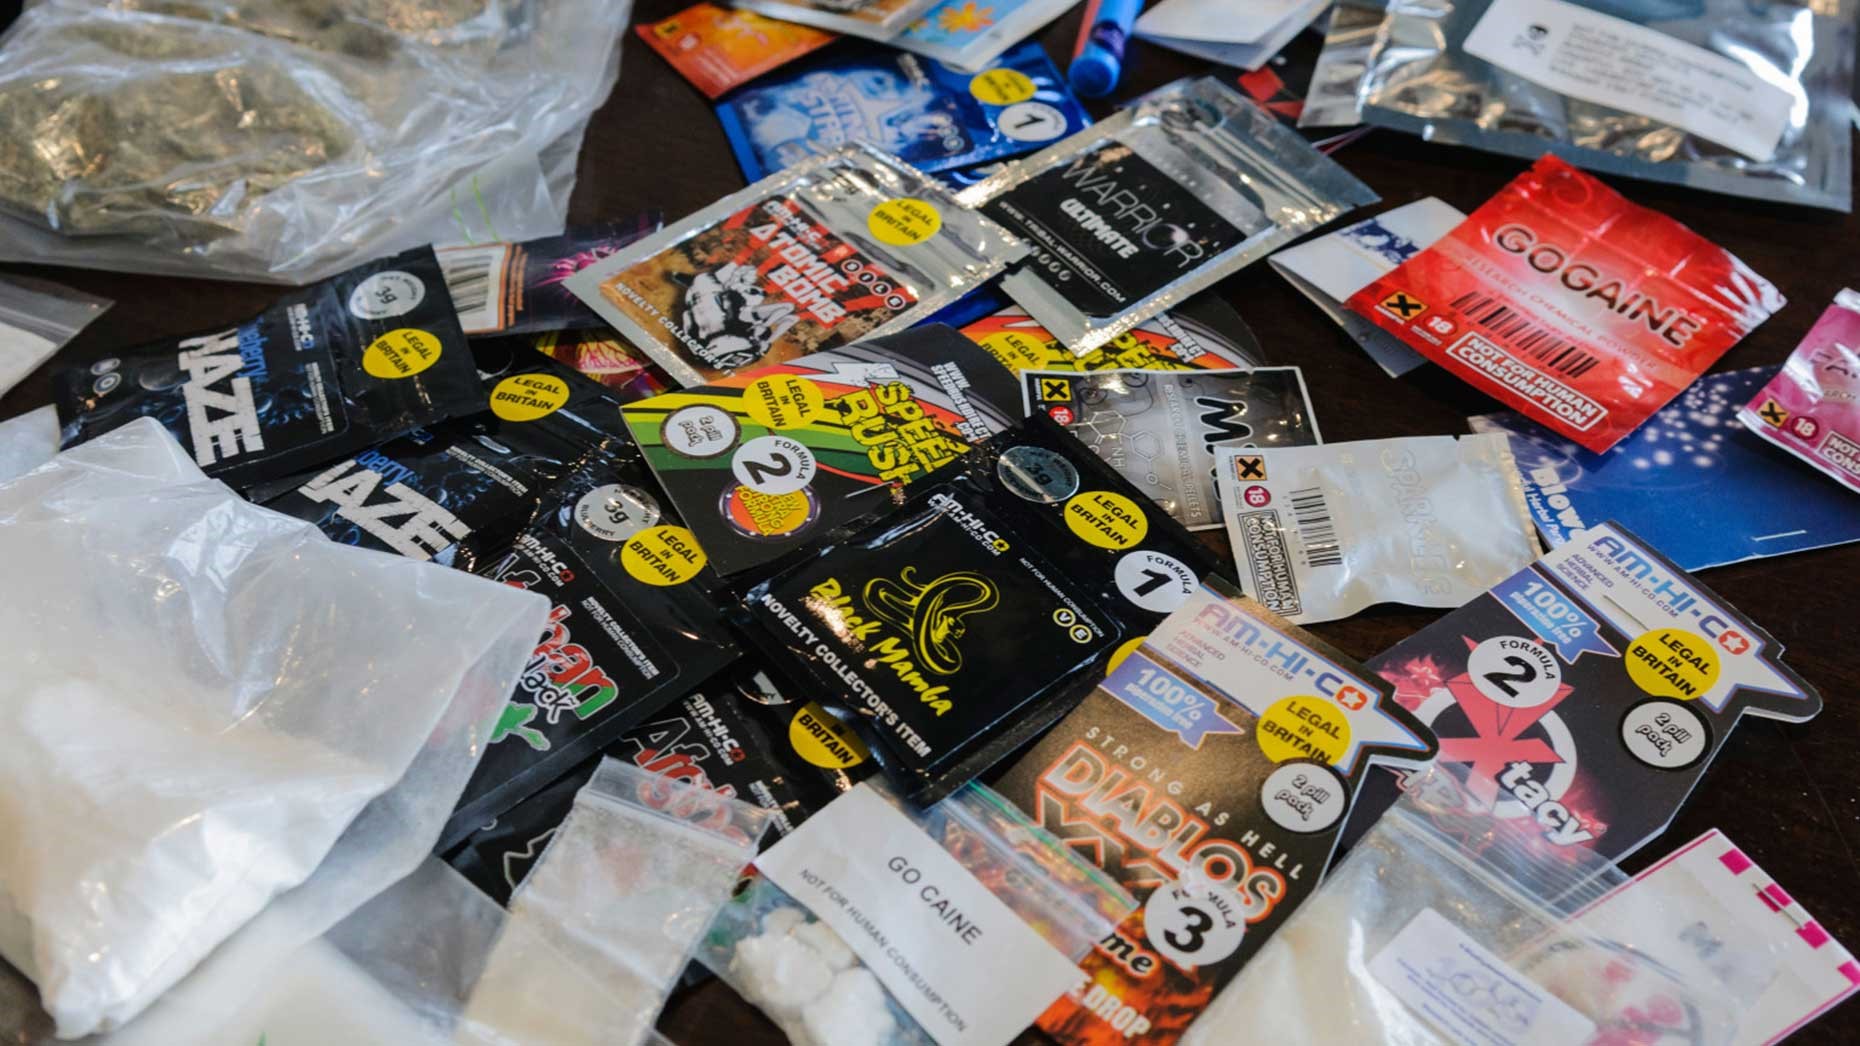 Programme on Legal Highs Launched, 5000+ Pupils Participated